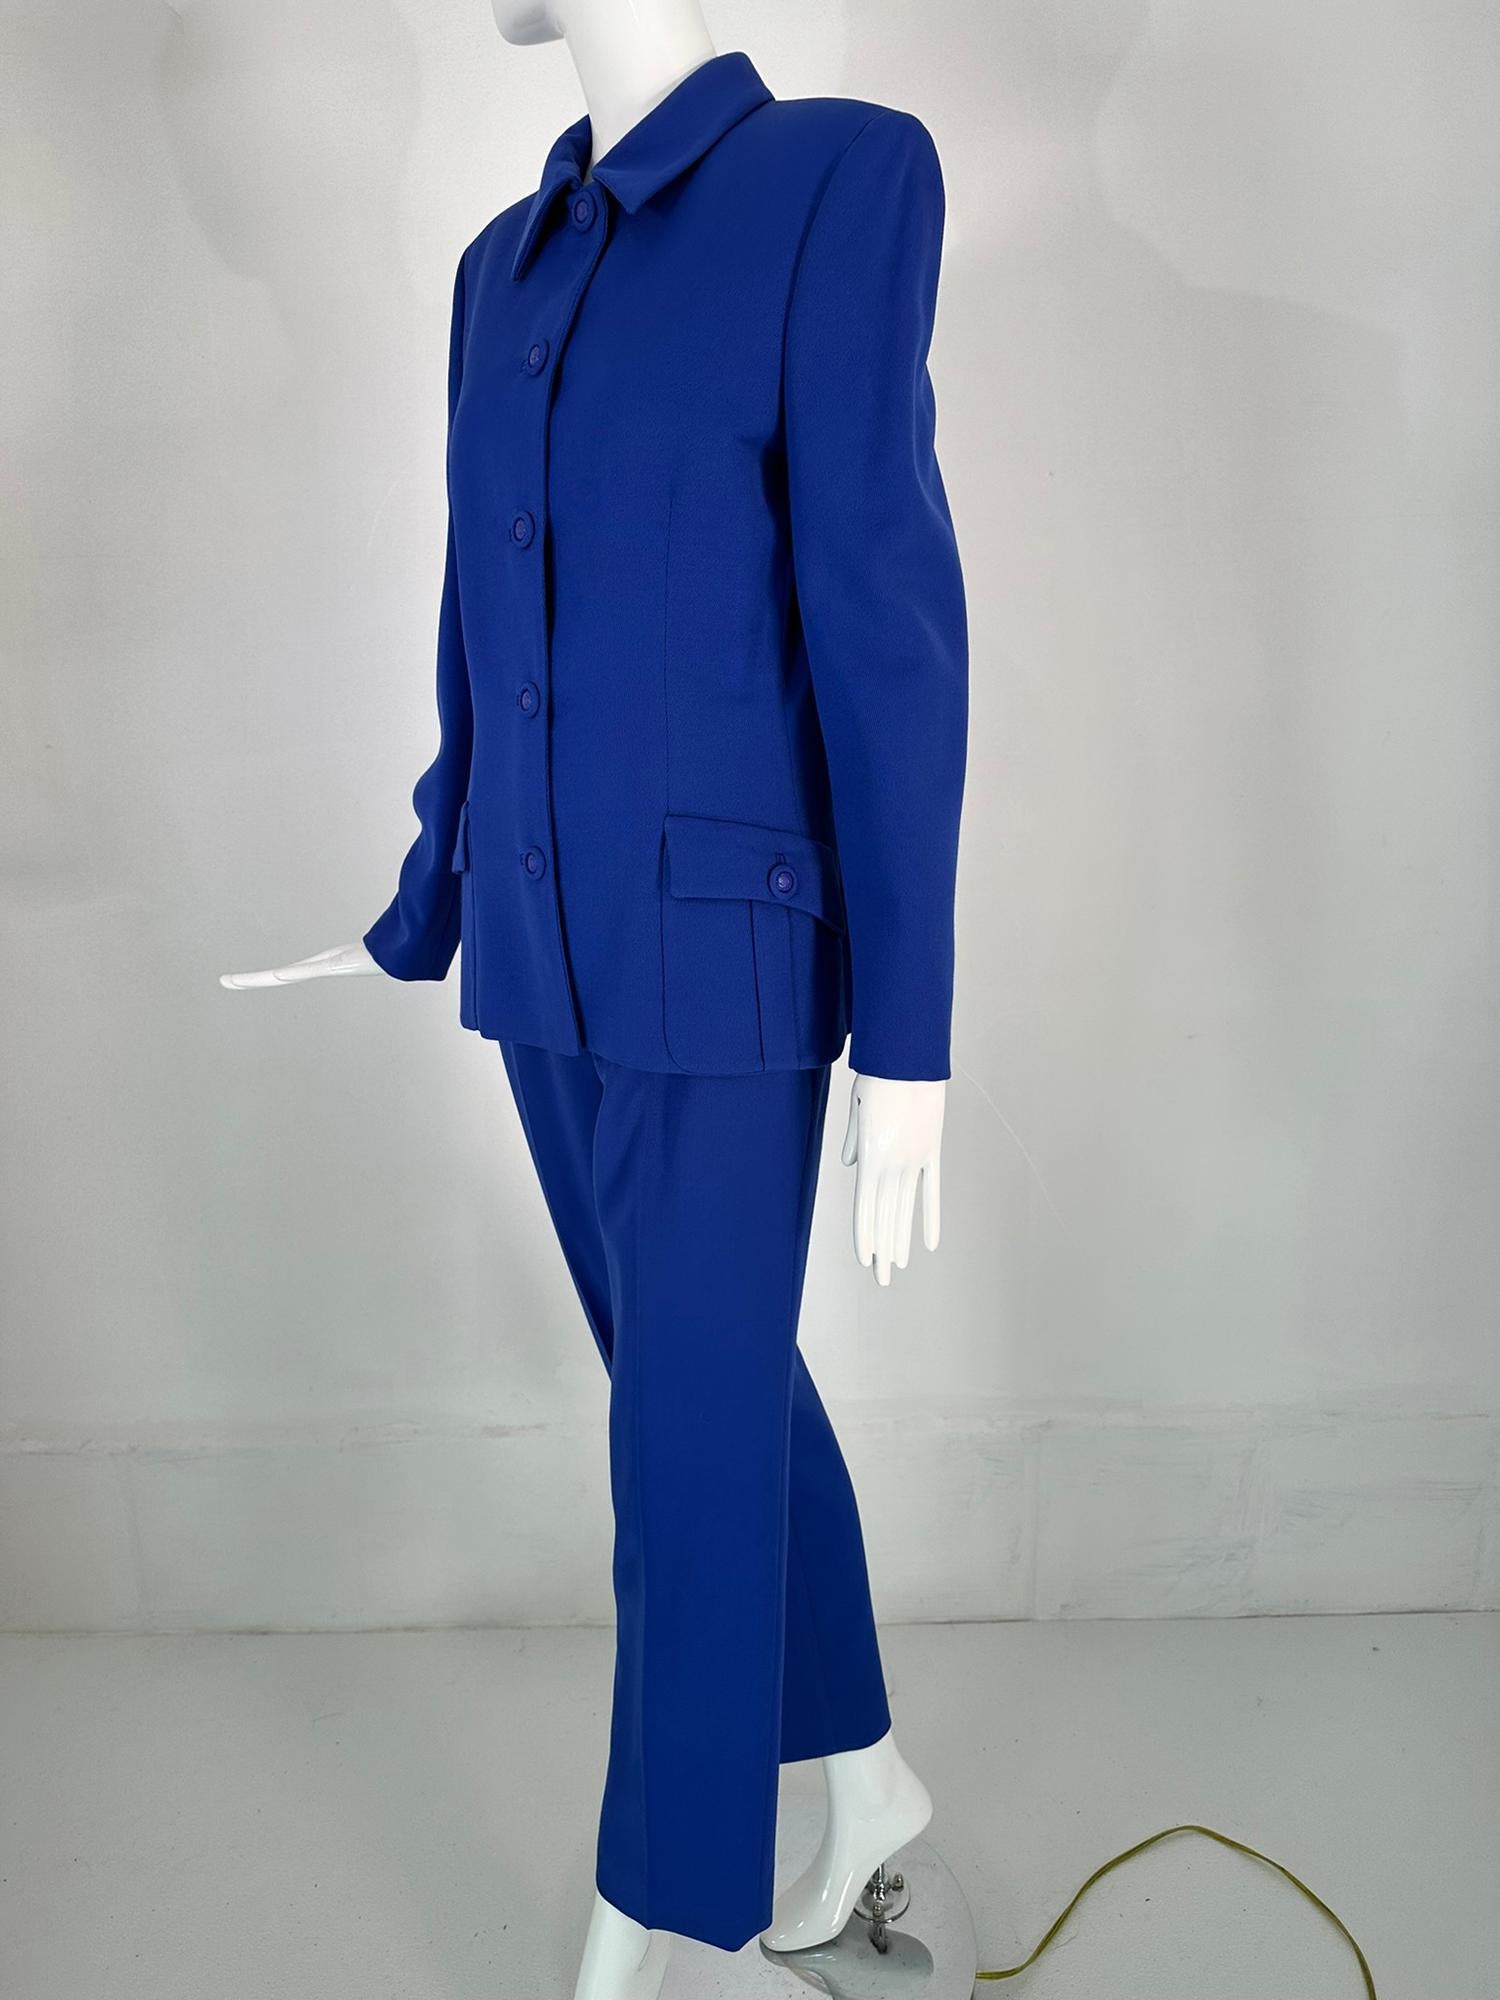 Gianni Versace Couture F/W 1995 royal blue wool twill pant suit. Beautifully tailored jacket that closes at the front with Medusa head centered self buttons. The collar can be worn buttoned to the top or with the collar worn down. Long sleeves have